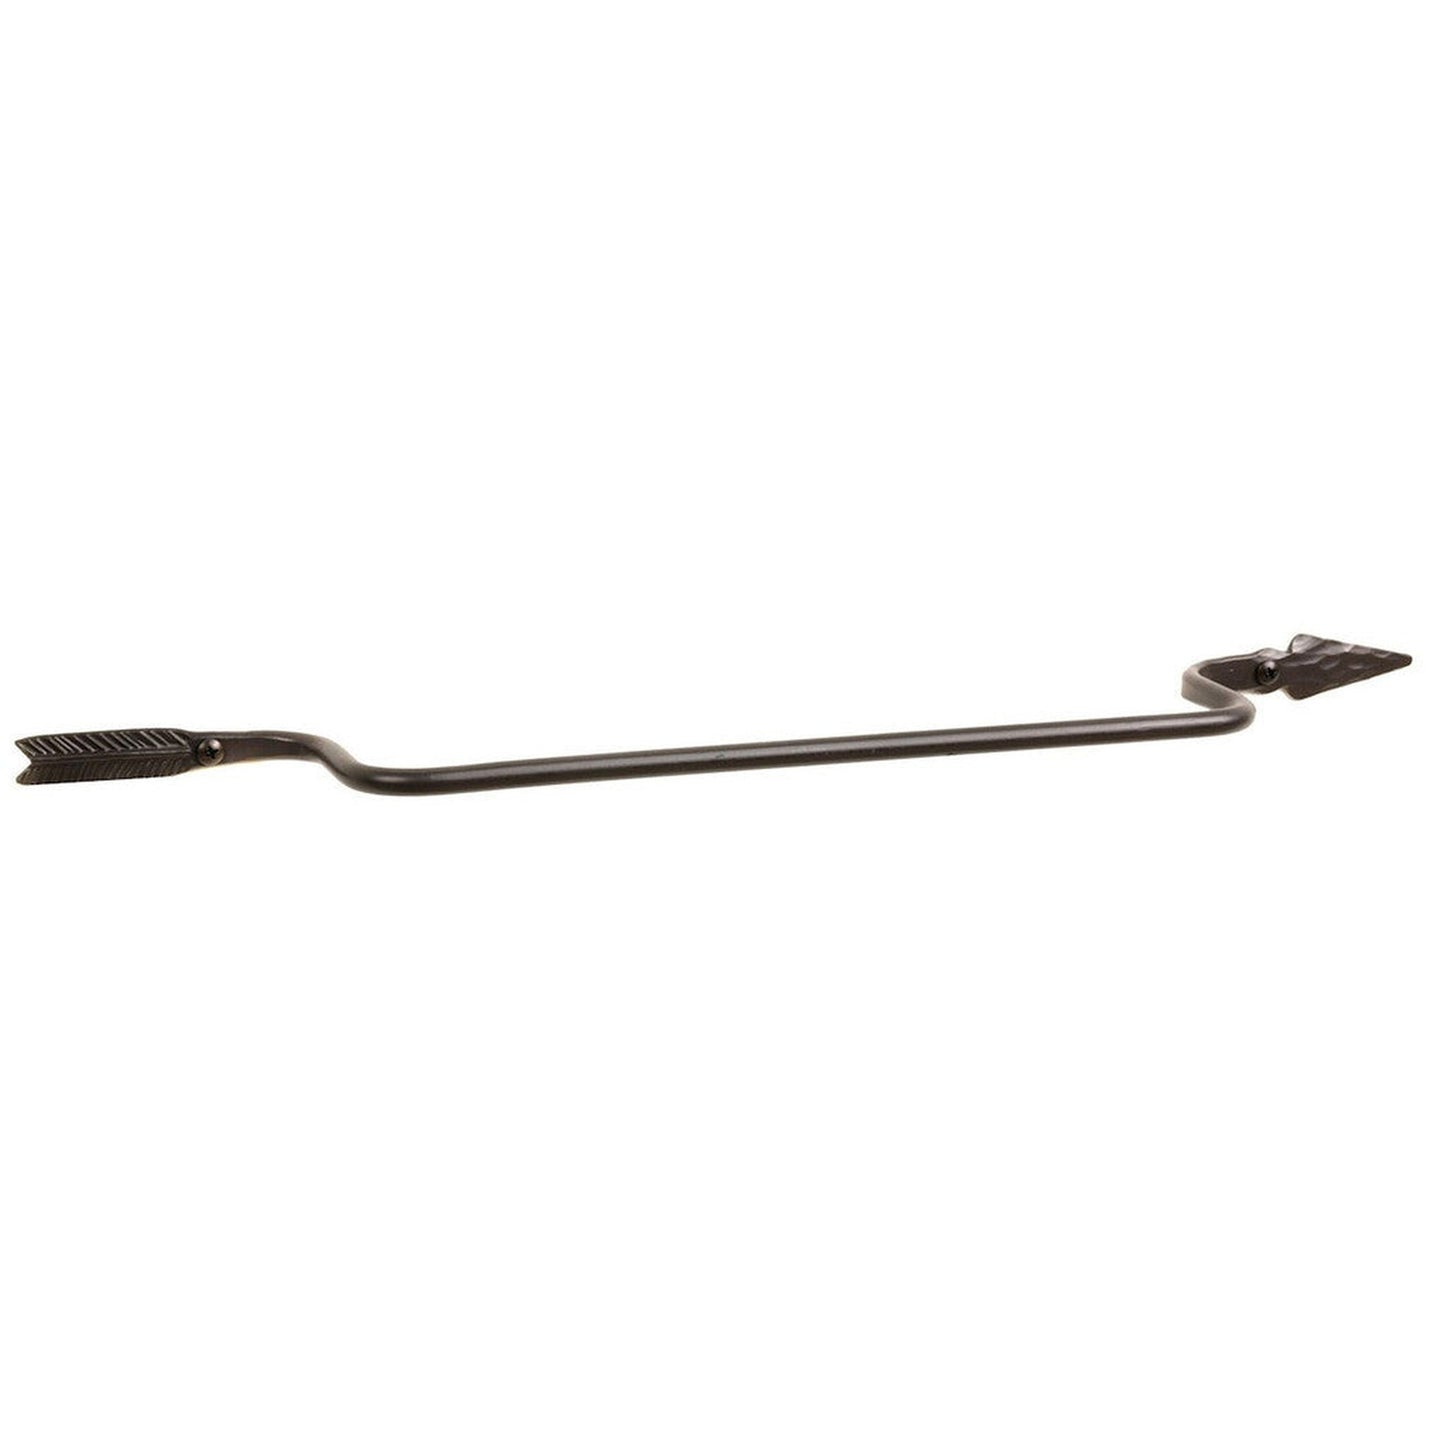 Stone County Ironworks Quapaw 16" Natural Black Iron Towel Bar With Copper Iron Accent